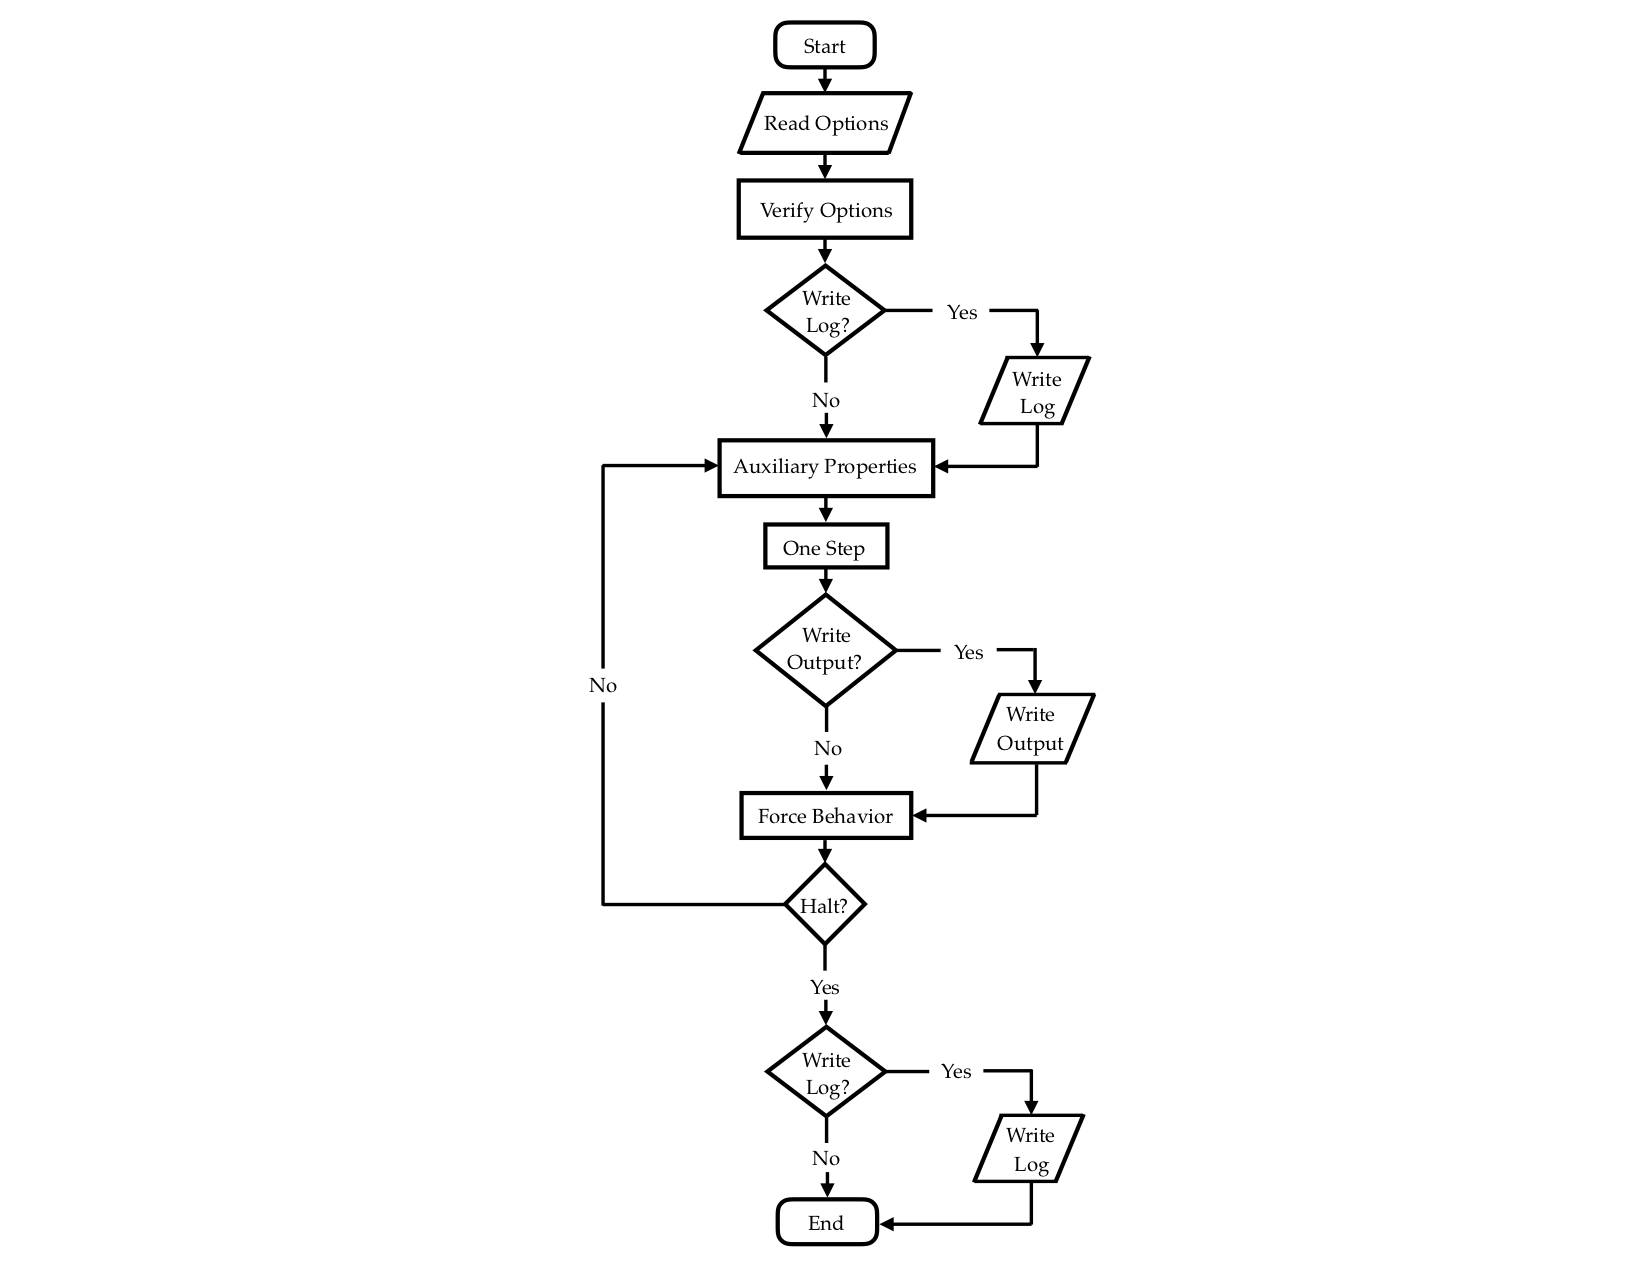 _images/VPLanetFlowChart.png